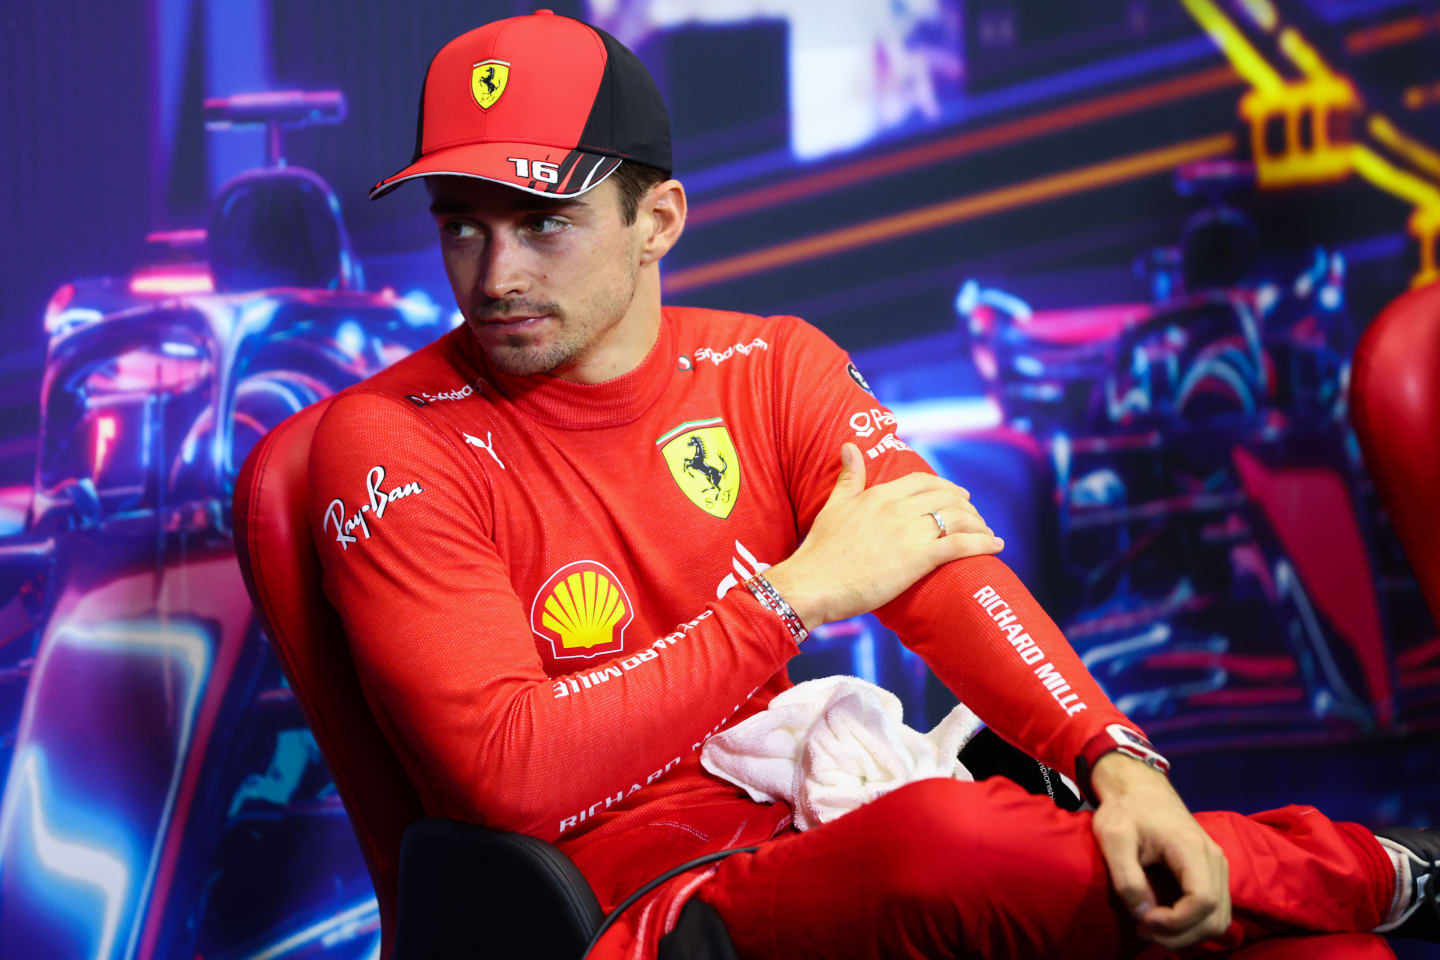 SINGAPORE, SINGAPORE - OCTOBER 01: Pole position qualifier Charles Leclerc of Monaco and Ferrari attends the press conference after qualifying ahead of the F1 Grand Prix of Singapore at Marina Bay Street Circuit on October 01, 2022 in Singapore, Singapore. (Photo by Dan Istitene/Getty Images)